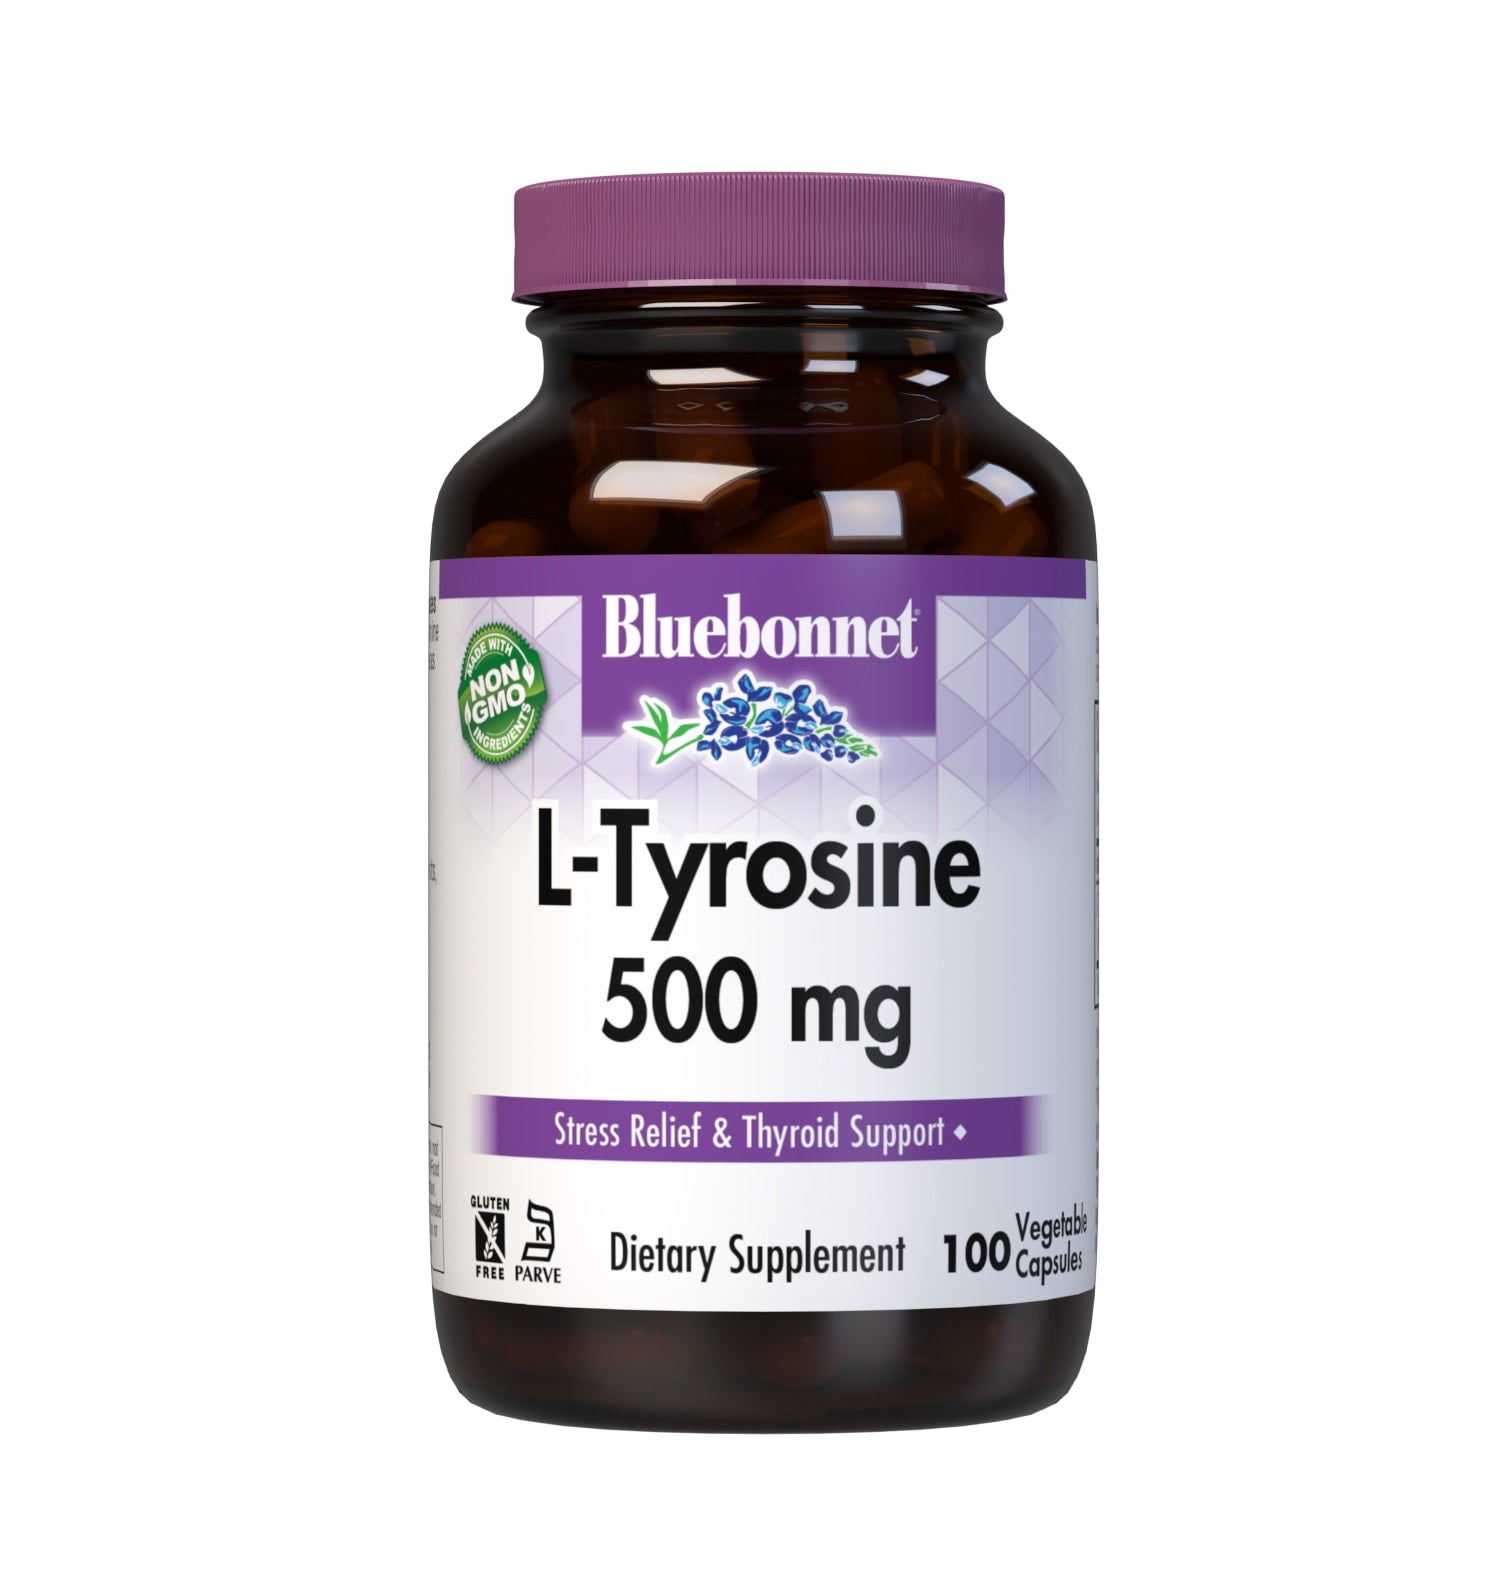 Bluebonnet L-Tyrosine 500 mg 100 Vegetable Capsules provide a free-form amino acid L-tyrosine in its crystalline form. #size_100 count